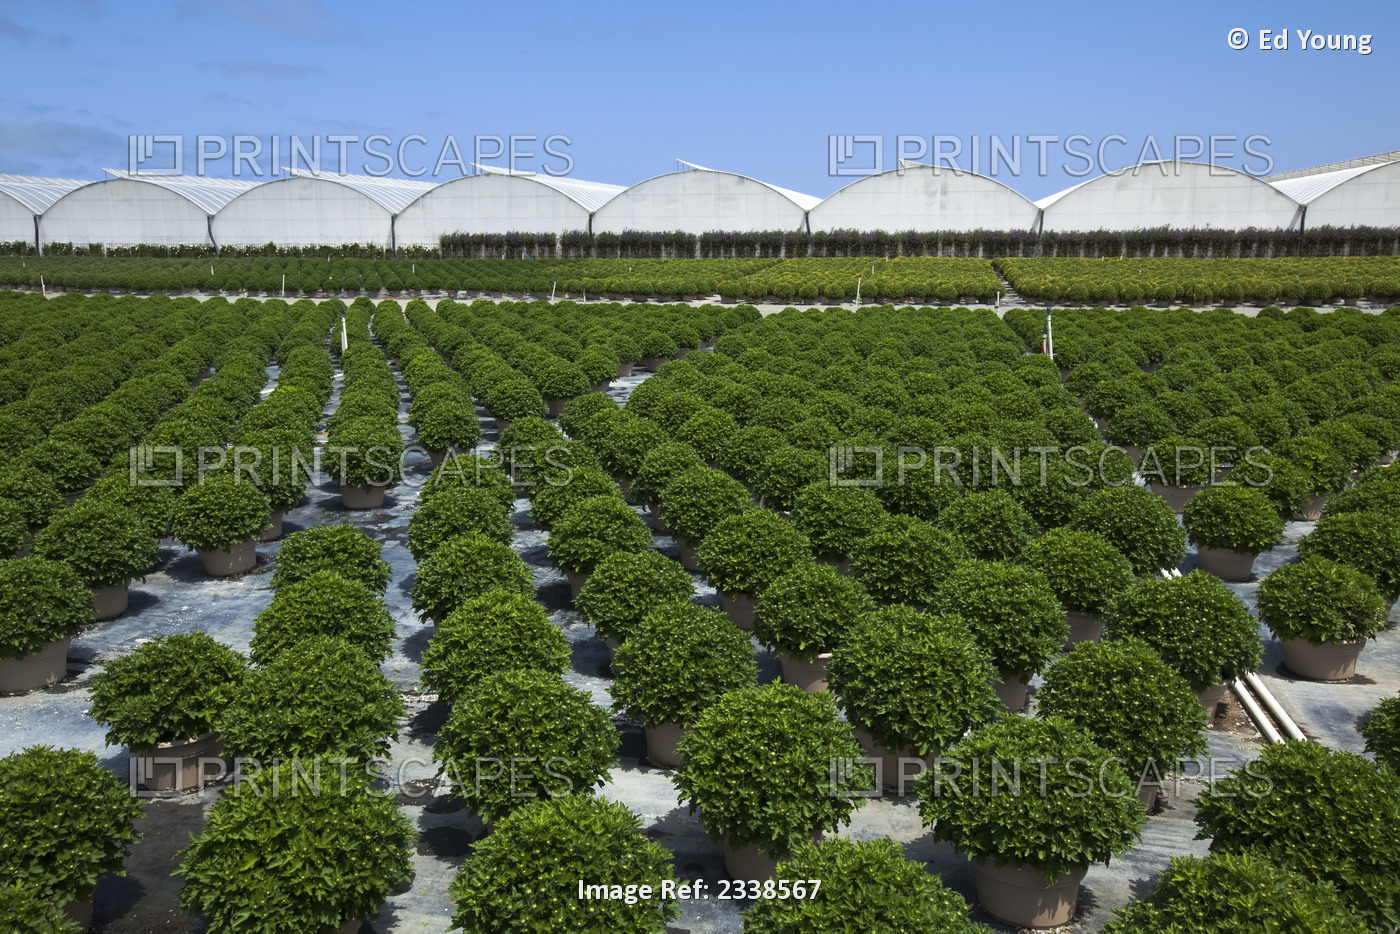 Agriculture - Potted ornamentals, bedding plants and shrubs at a horticultural ...